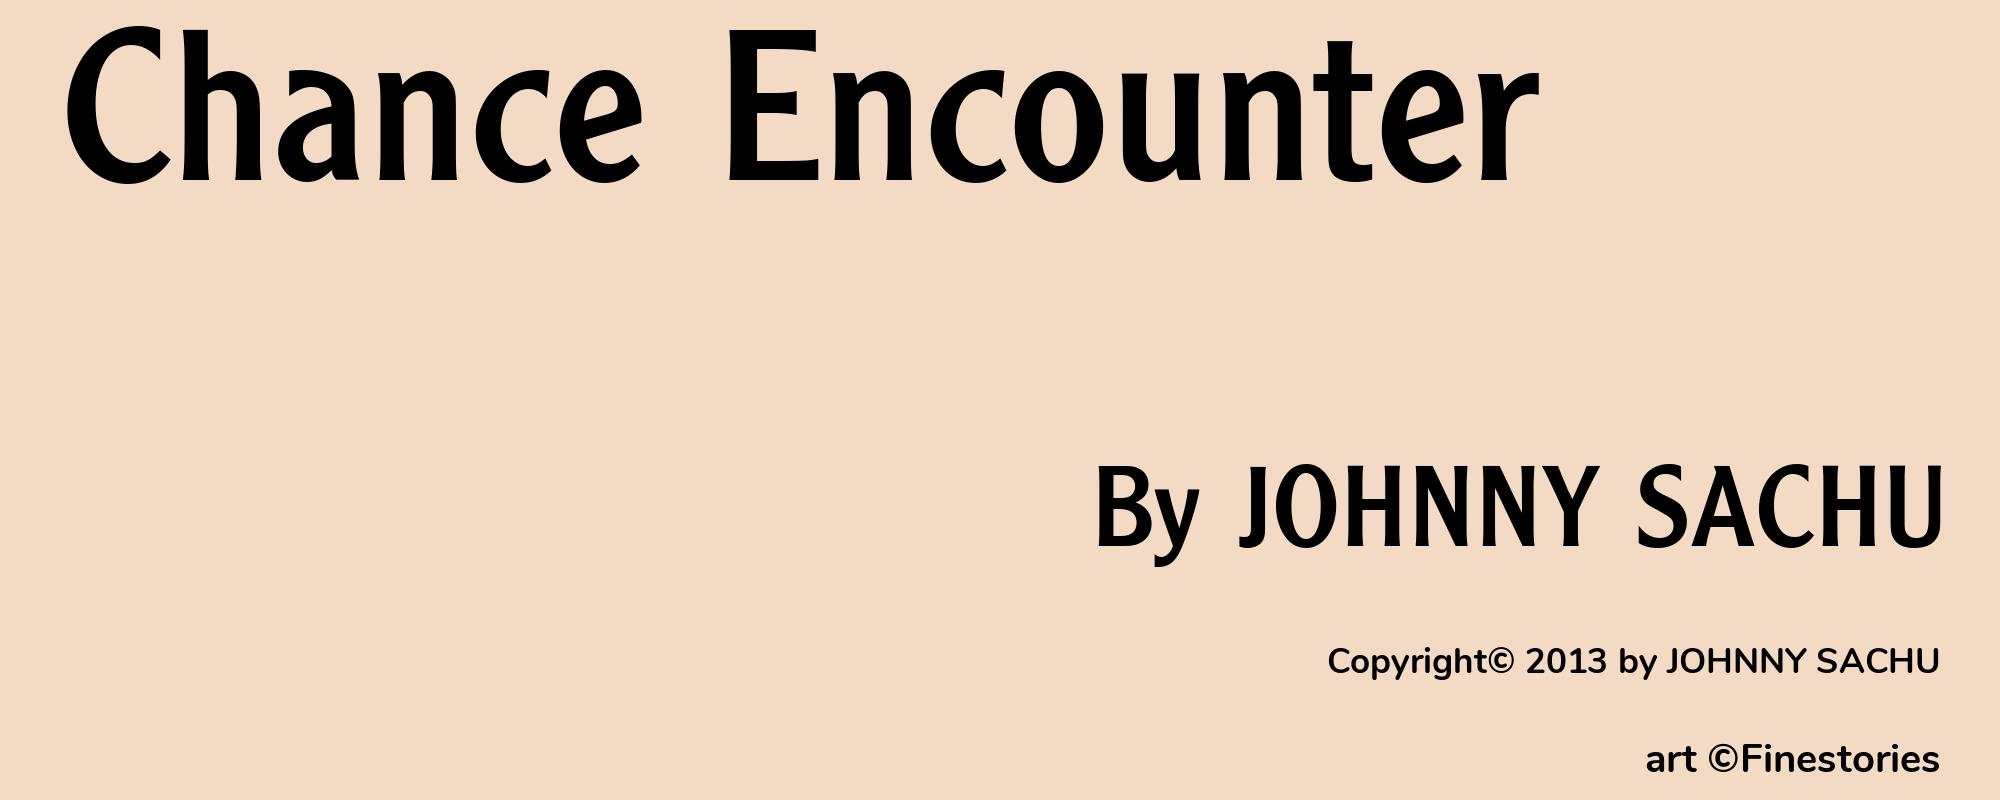 Chance Encounter - Cover